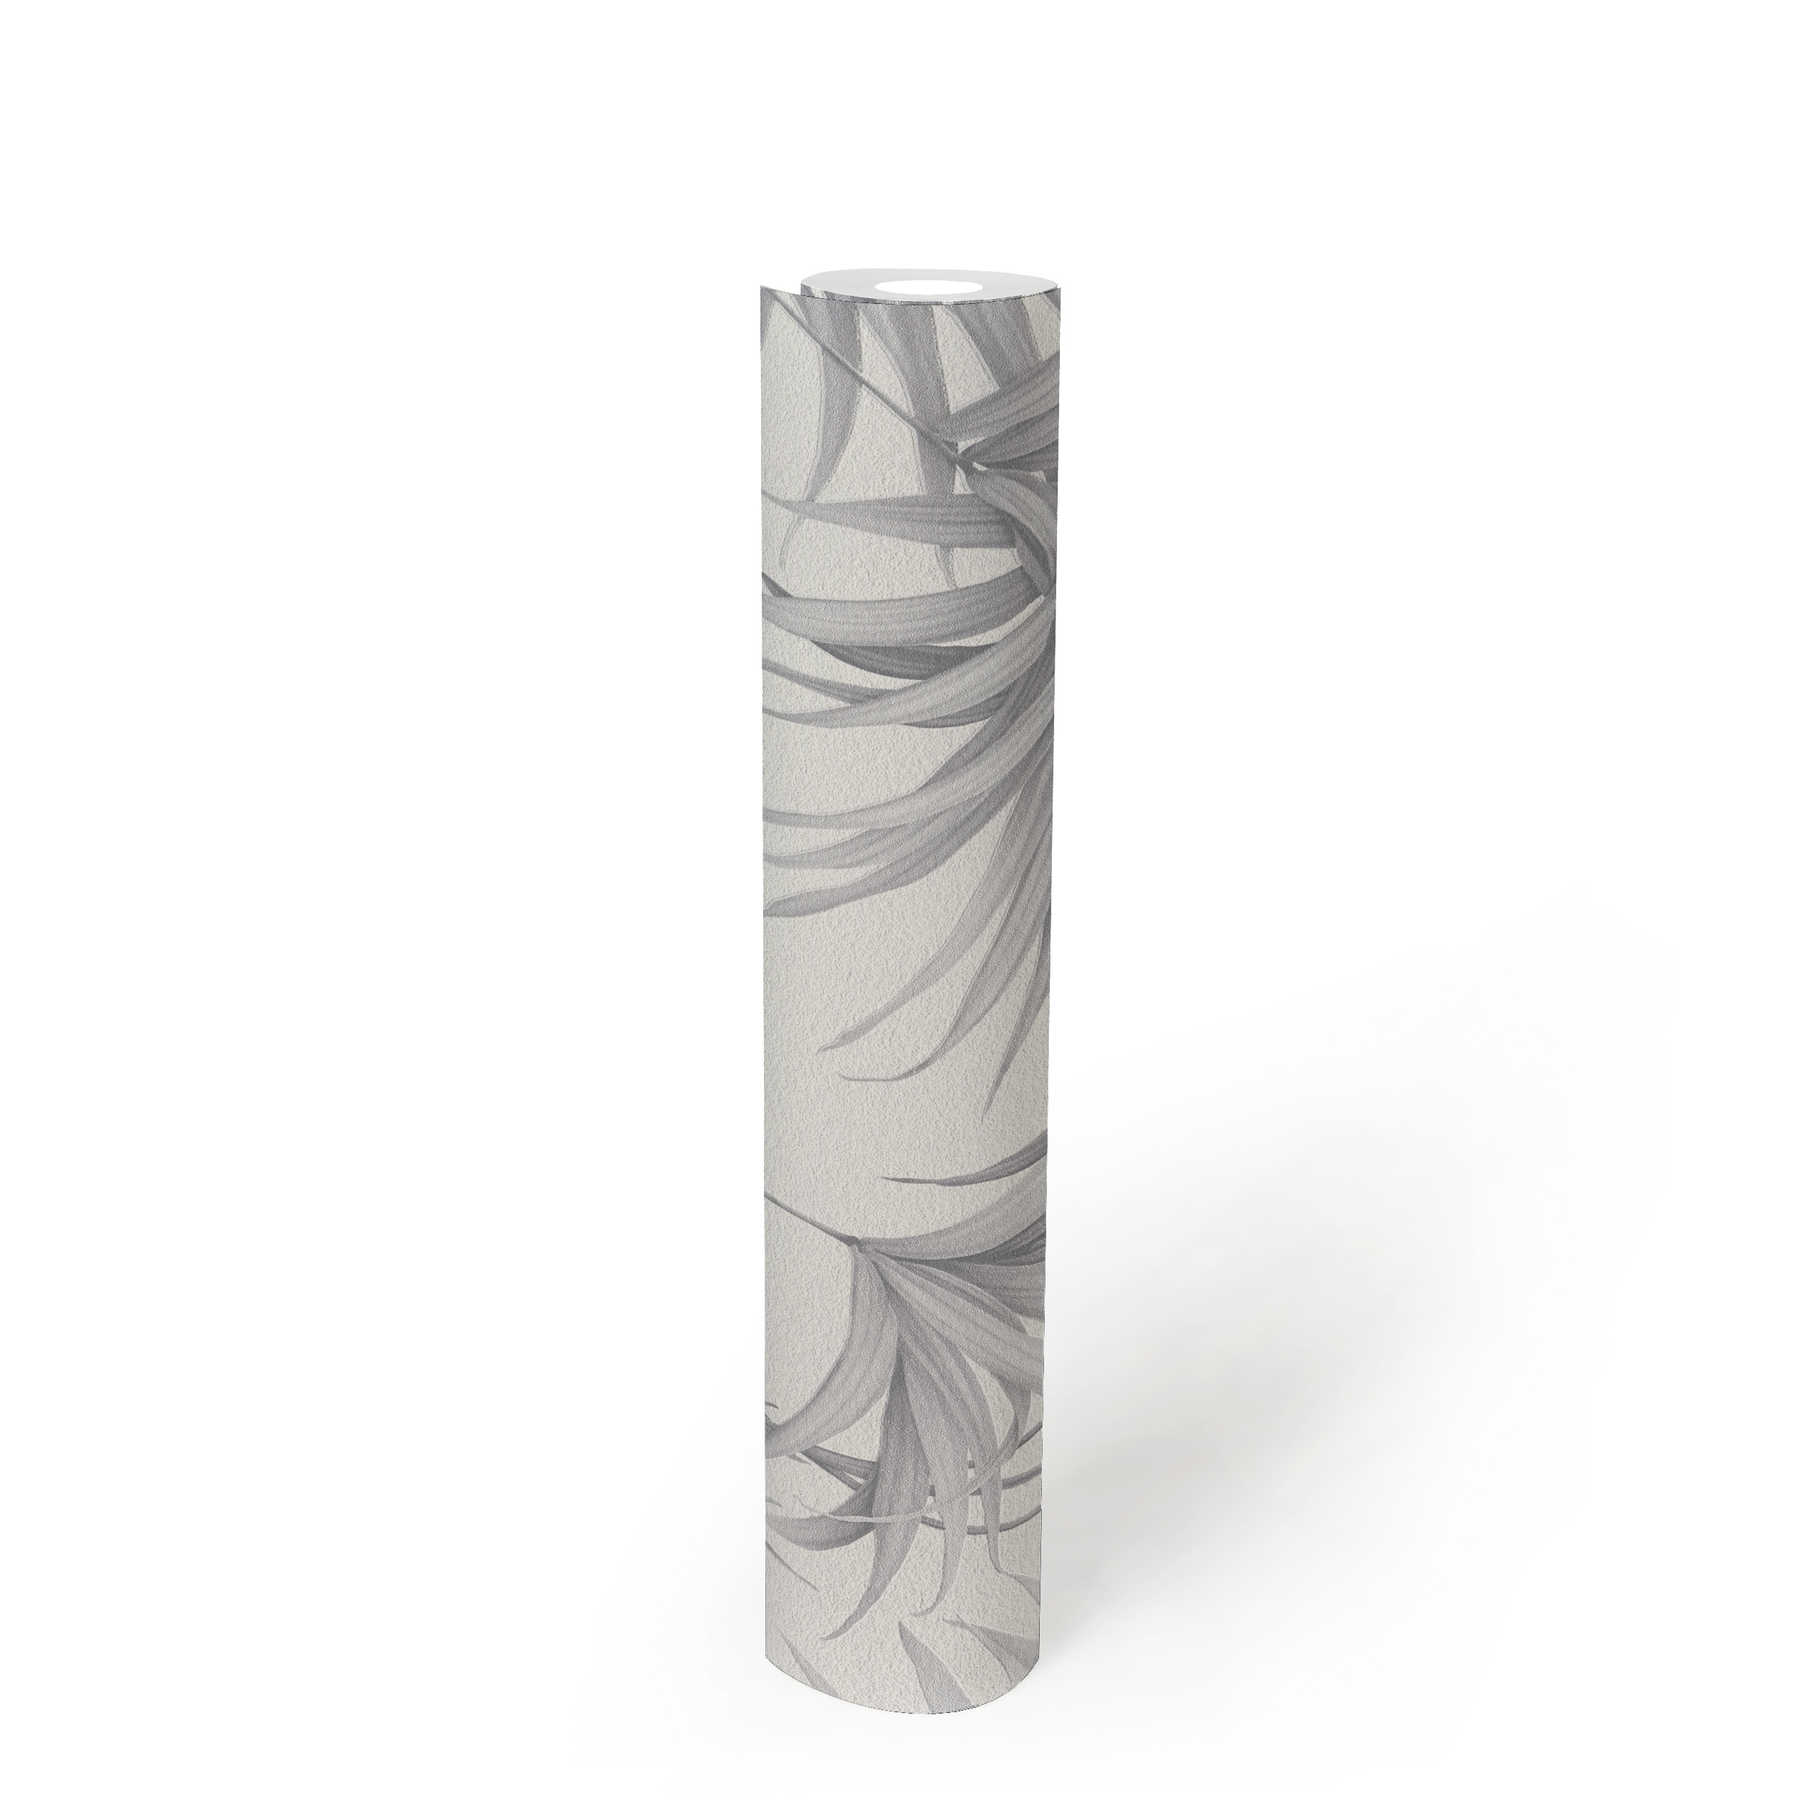             Non-woven wallpaper grey leaves pattern from MICHALSKY - grey
        